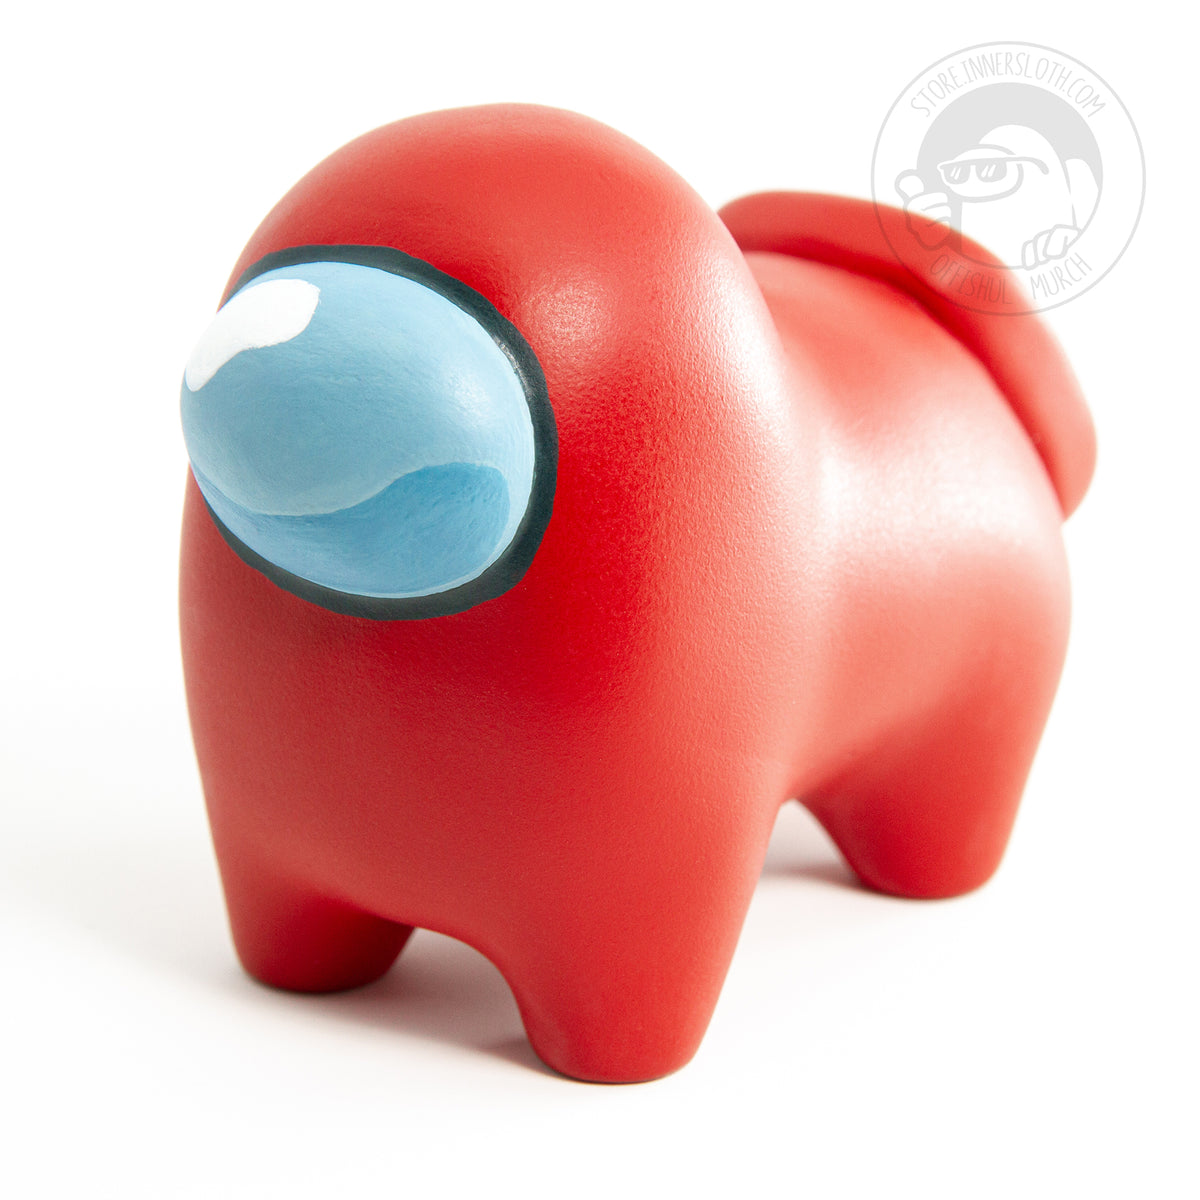 A ¾ view of the Crewgi Figurine reveals its back legs, for a total of four, and a backpack placed squarely on its bum. A light shines on the red color, revealing a beautiful matte texture.